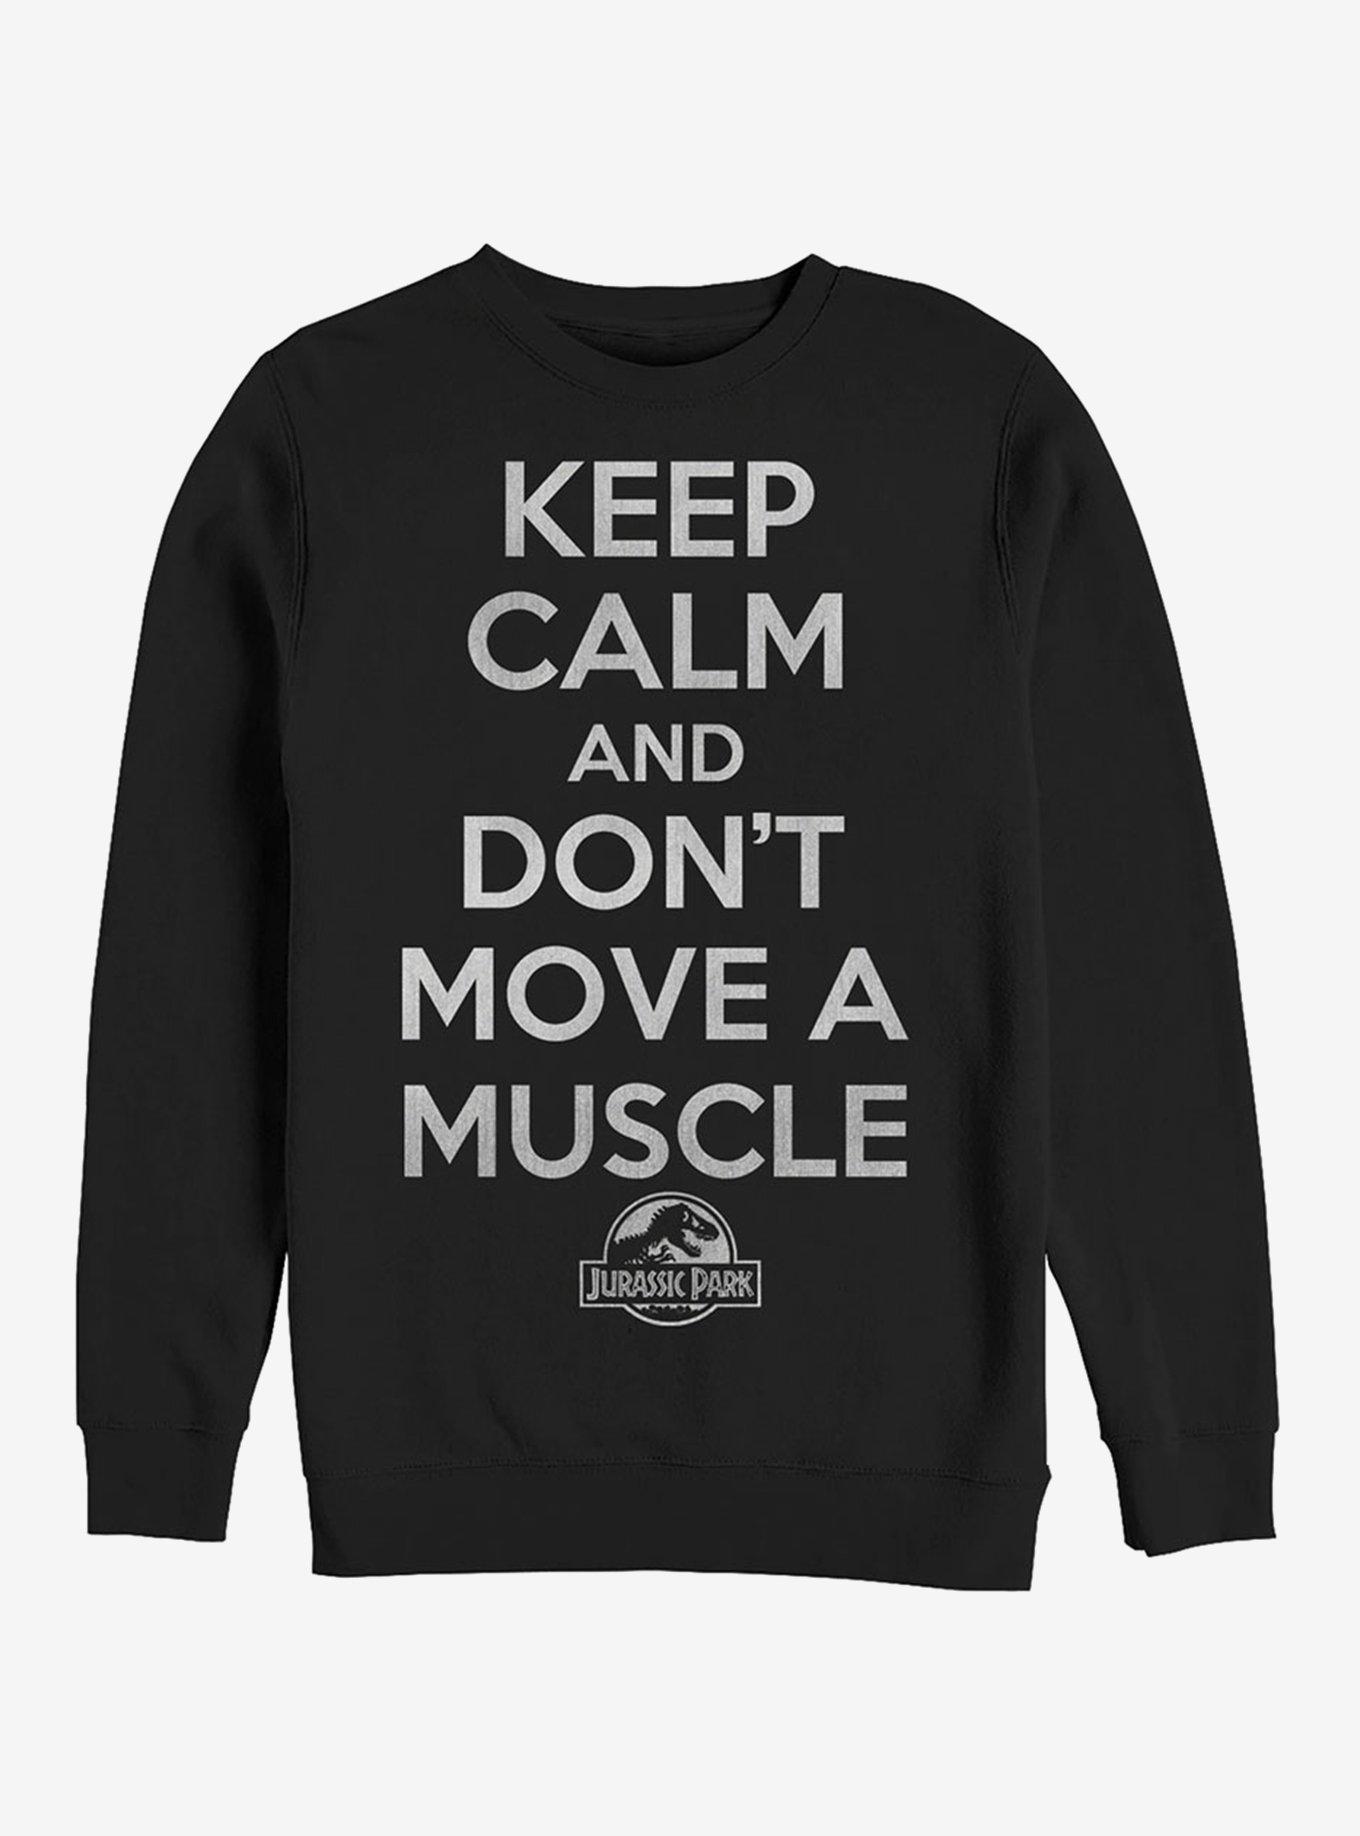 Keep Calm and Don't Move a Muscle Sweatshirt, BLACK, hi-res